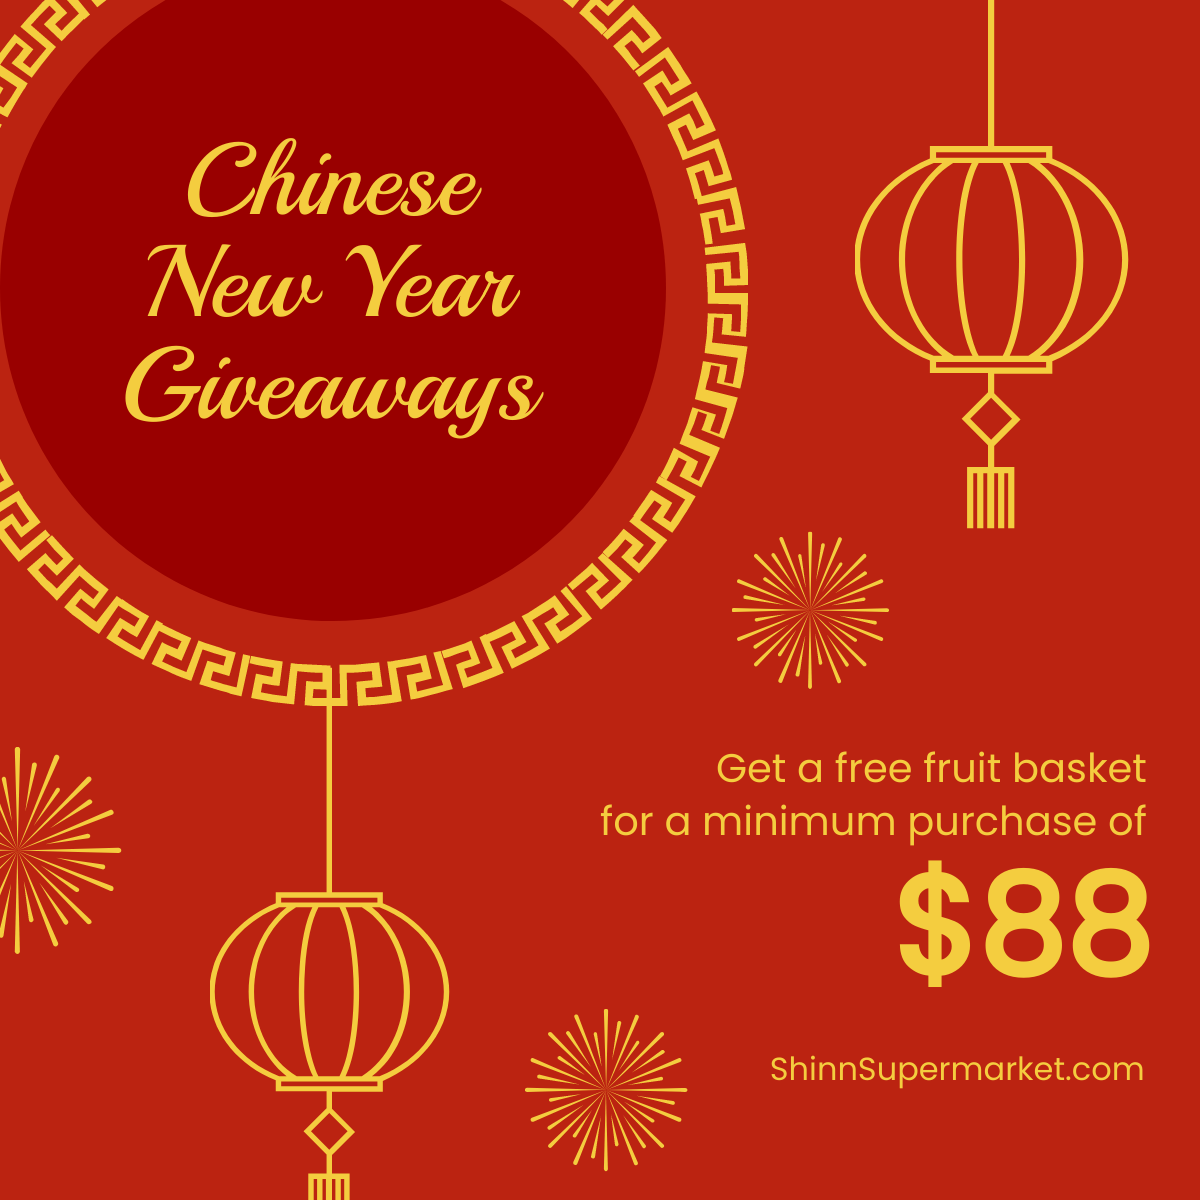 Chinese New Year Giveaway Linkedin Post